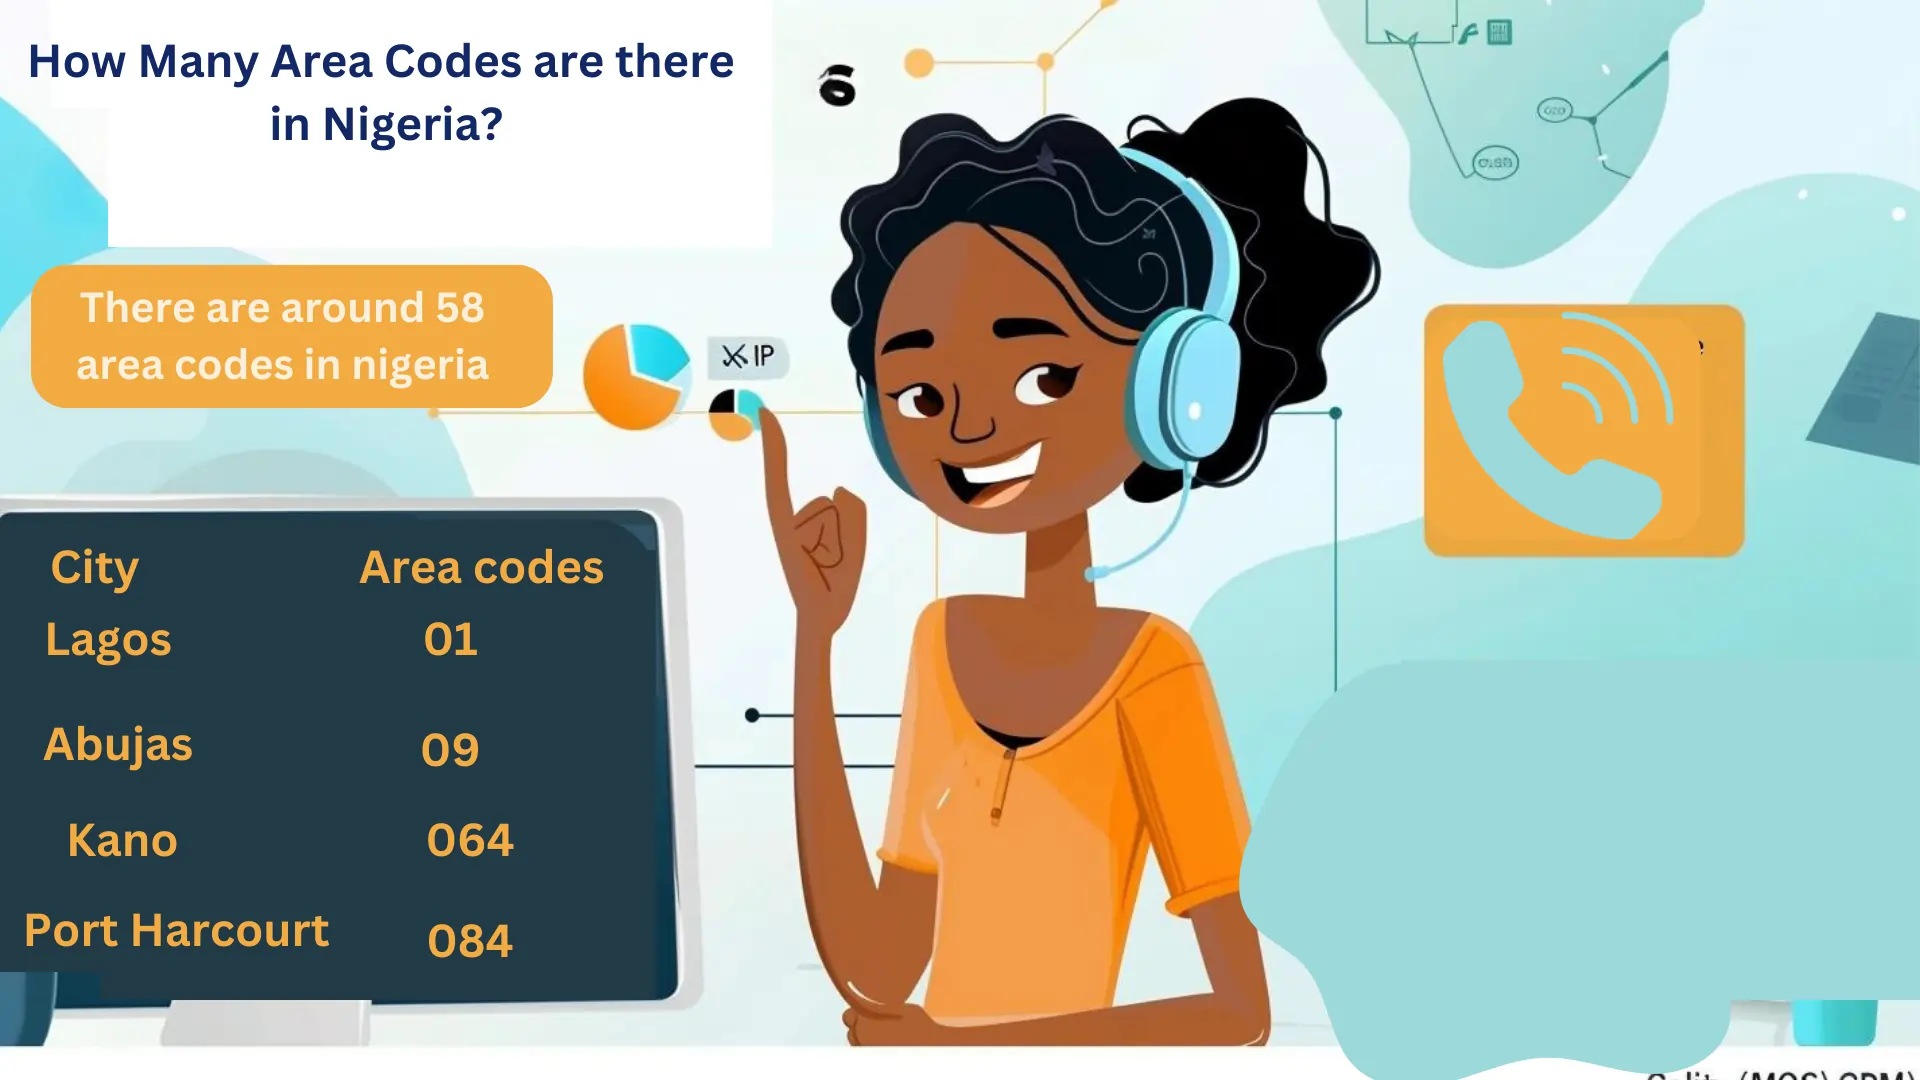 How Many Area Codes are there in Nigeria?
